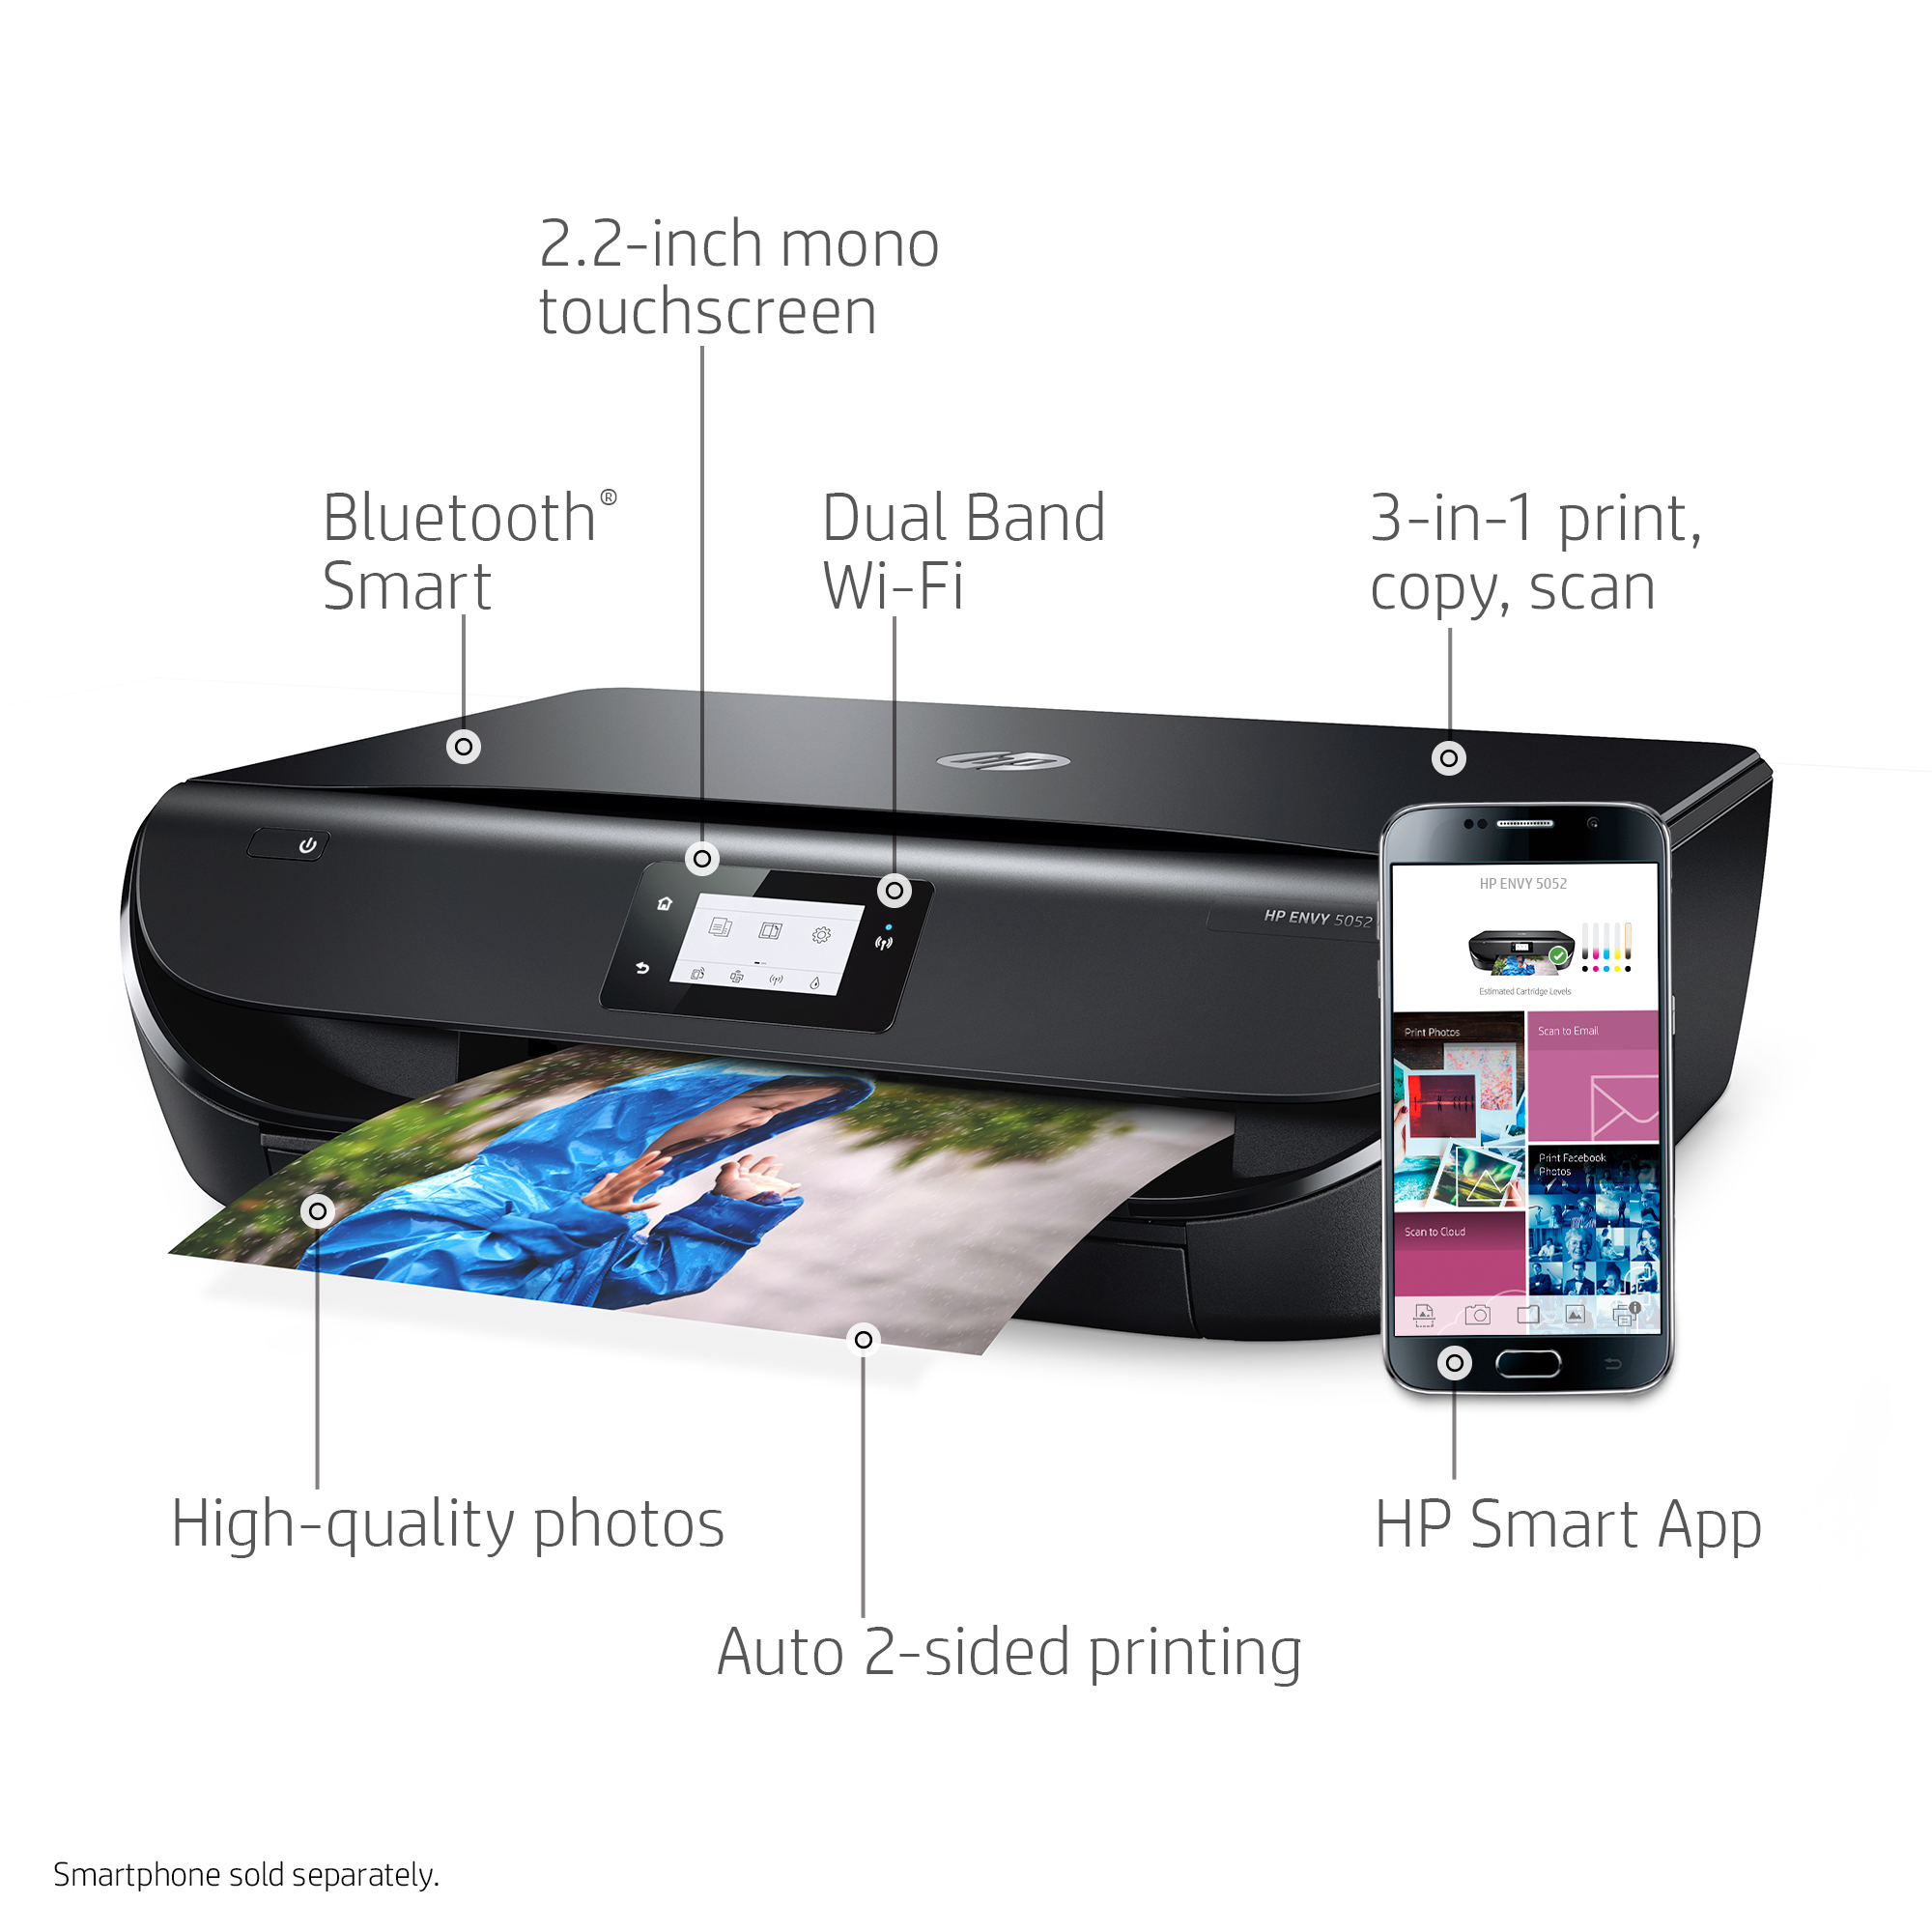 Hp Envy 5052 All-In-One Wireless Color Inkjet Printer (M2U92A) Dual Band Wifi Borderless Photos, Auto 2-Sided Printing, Black - image 2 of 9